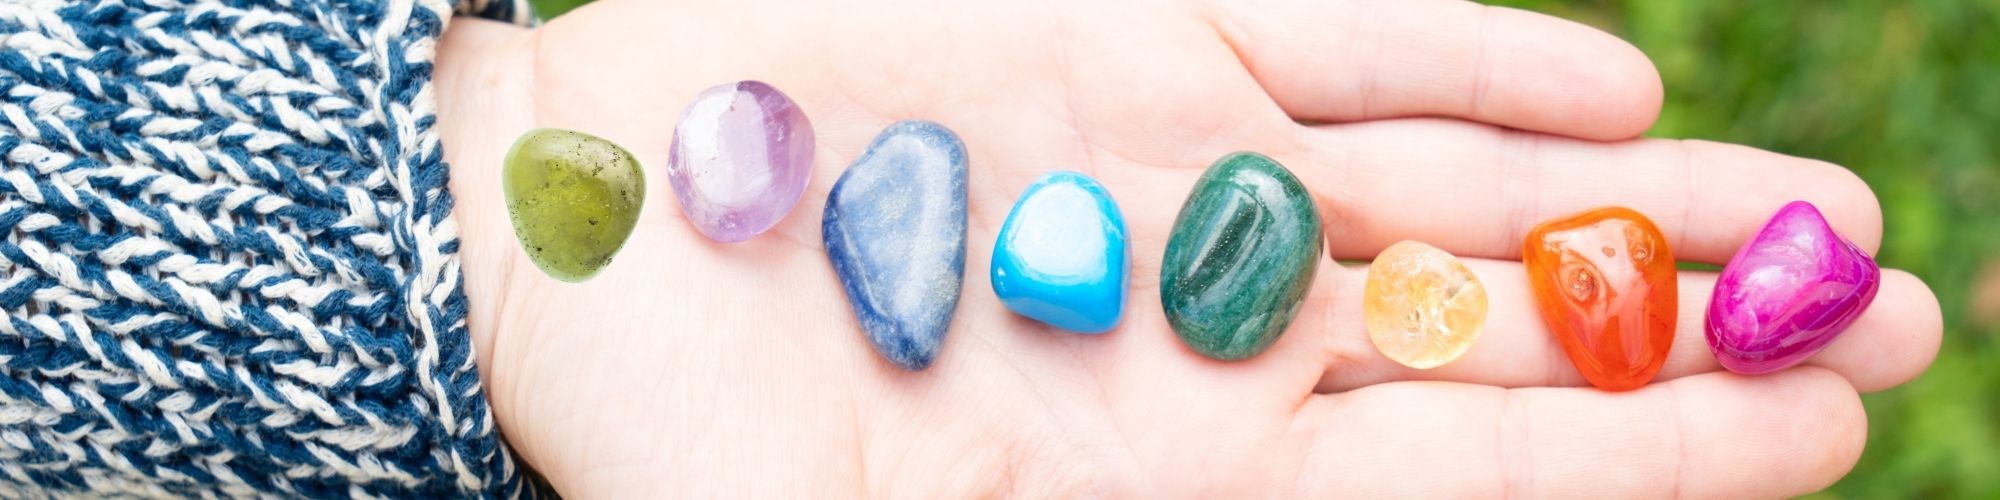 How to use crystals for beginners